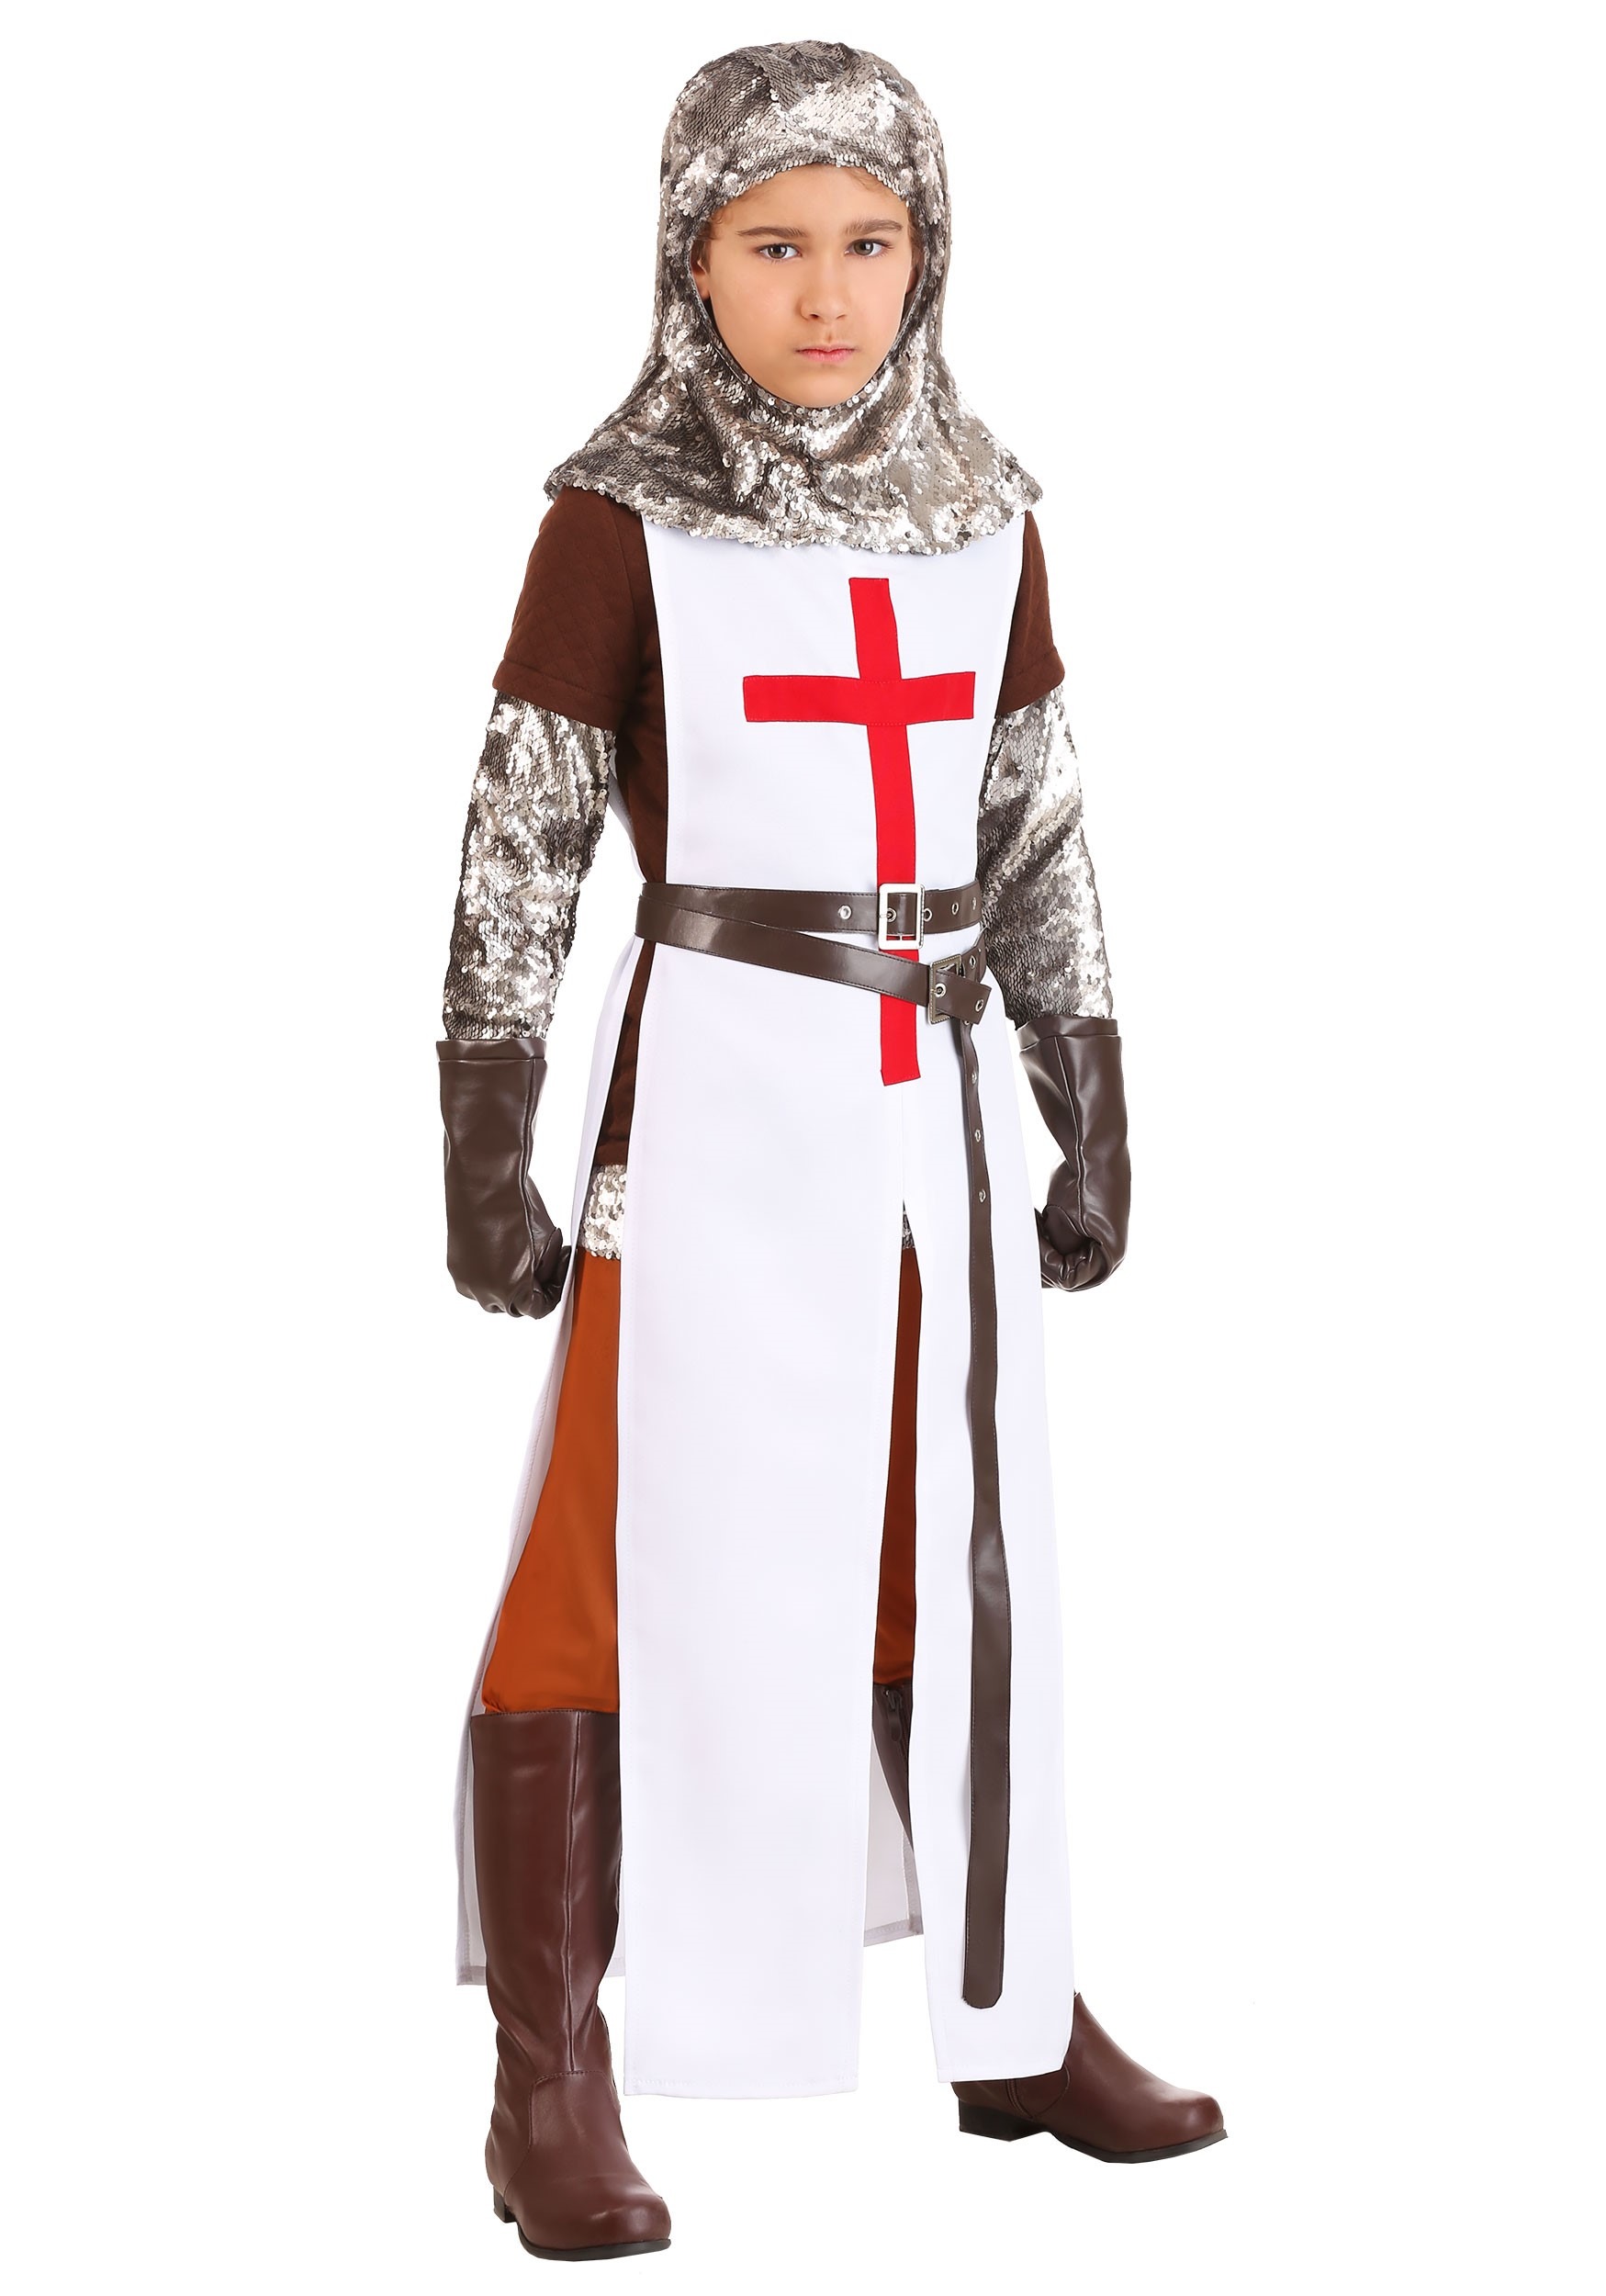 Photos - Fancy Dress Crusader FUN Costumes  Knight Costume for Boy's Brown/Gray/White FU 